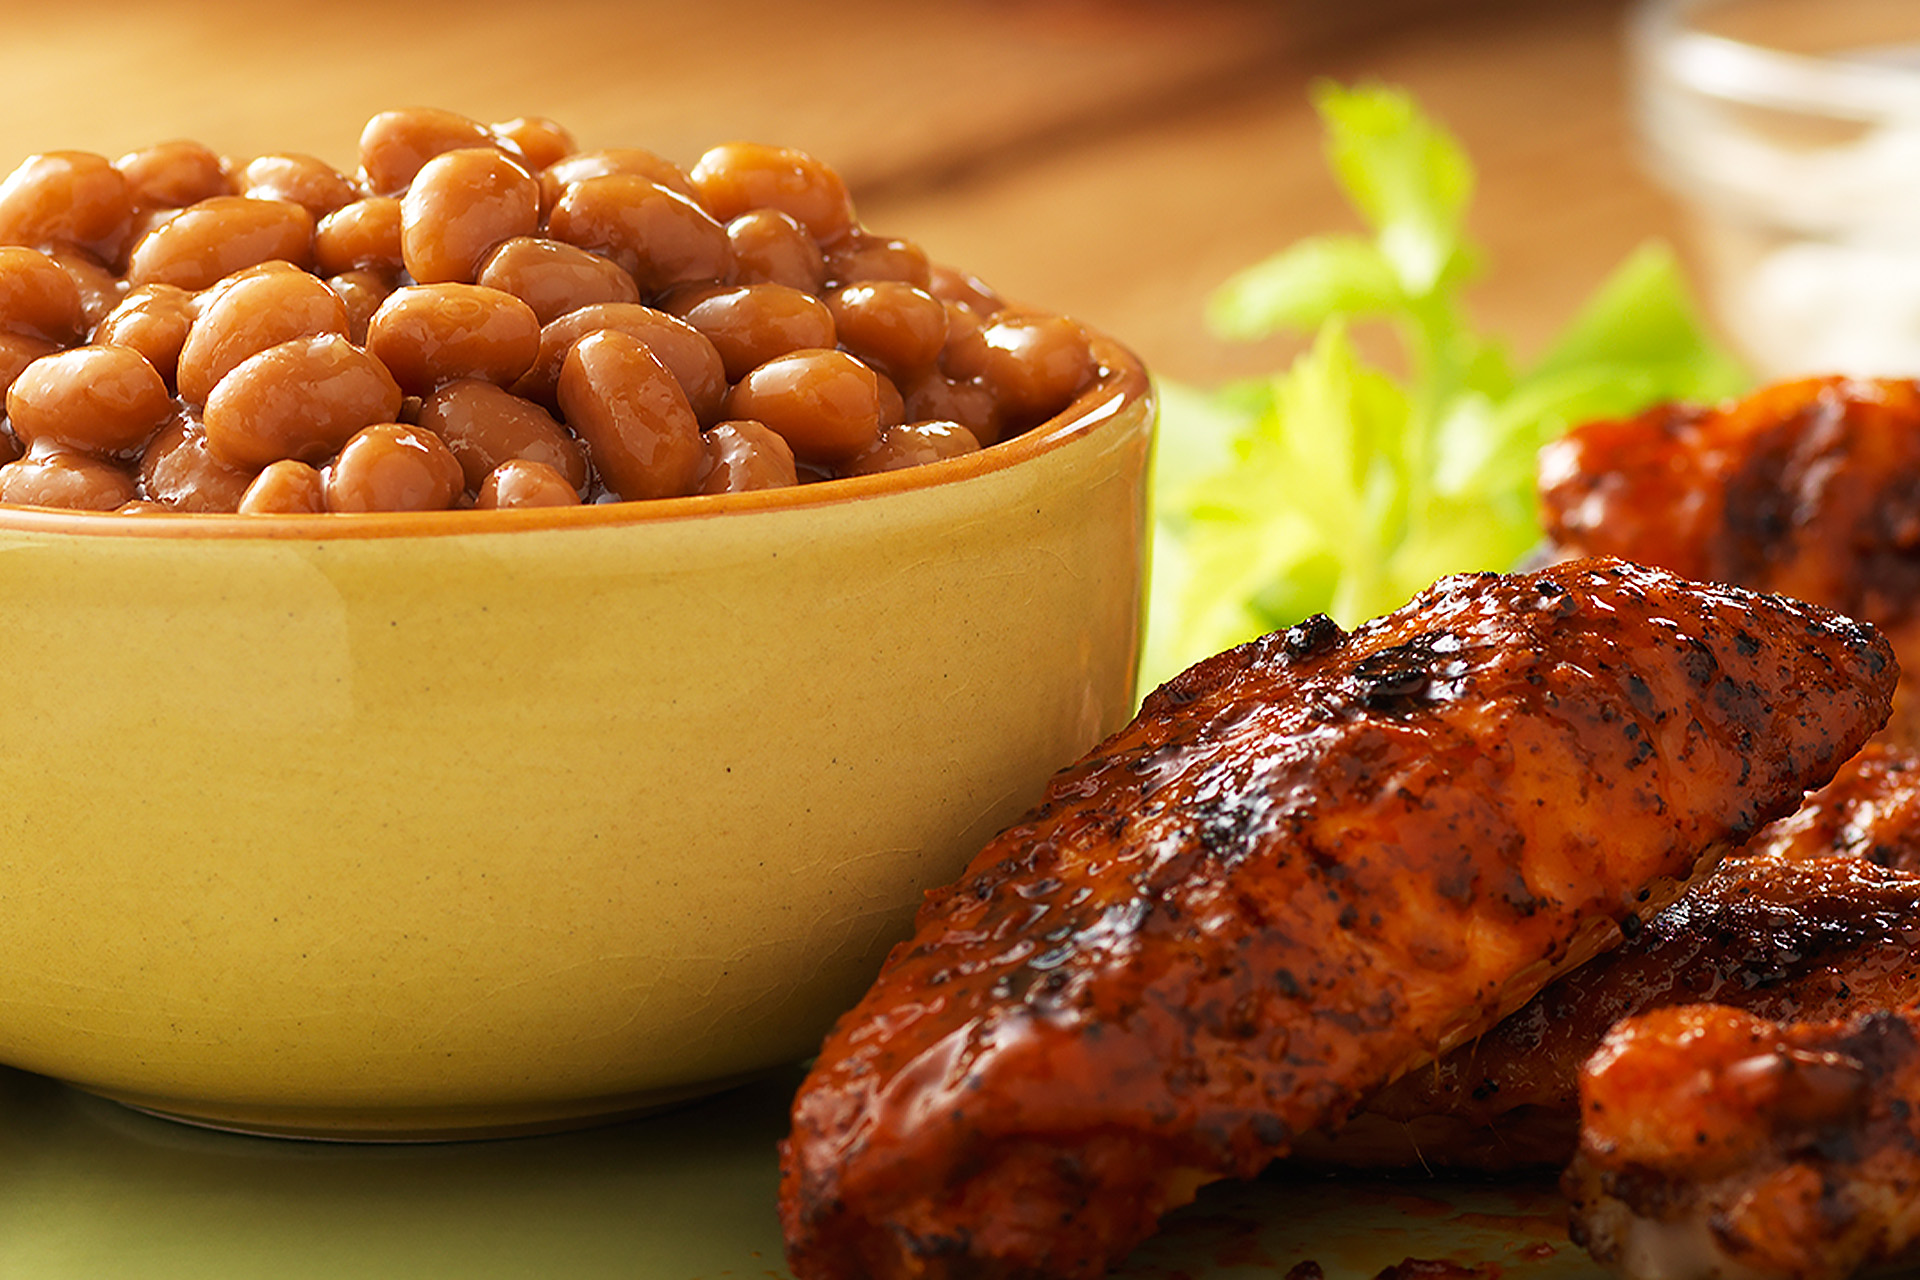 Grilled buffalo wings next to a yellow bowl of baked beans